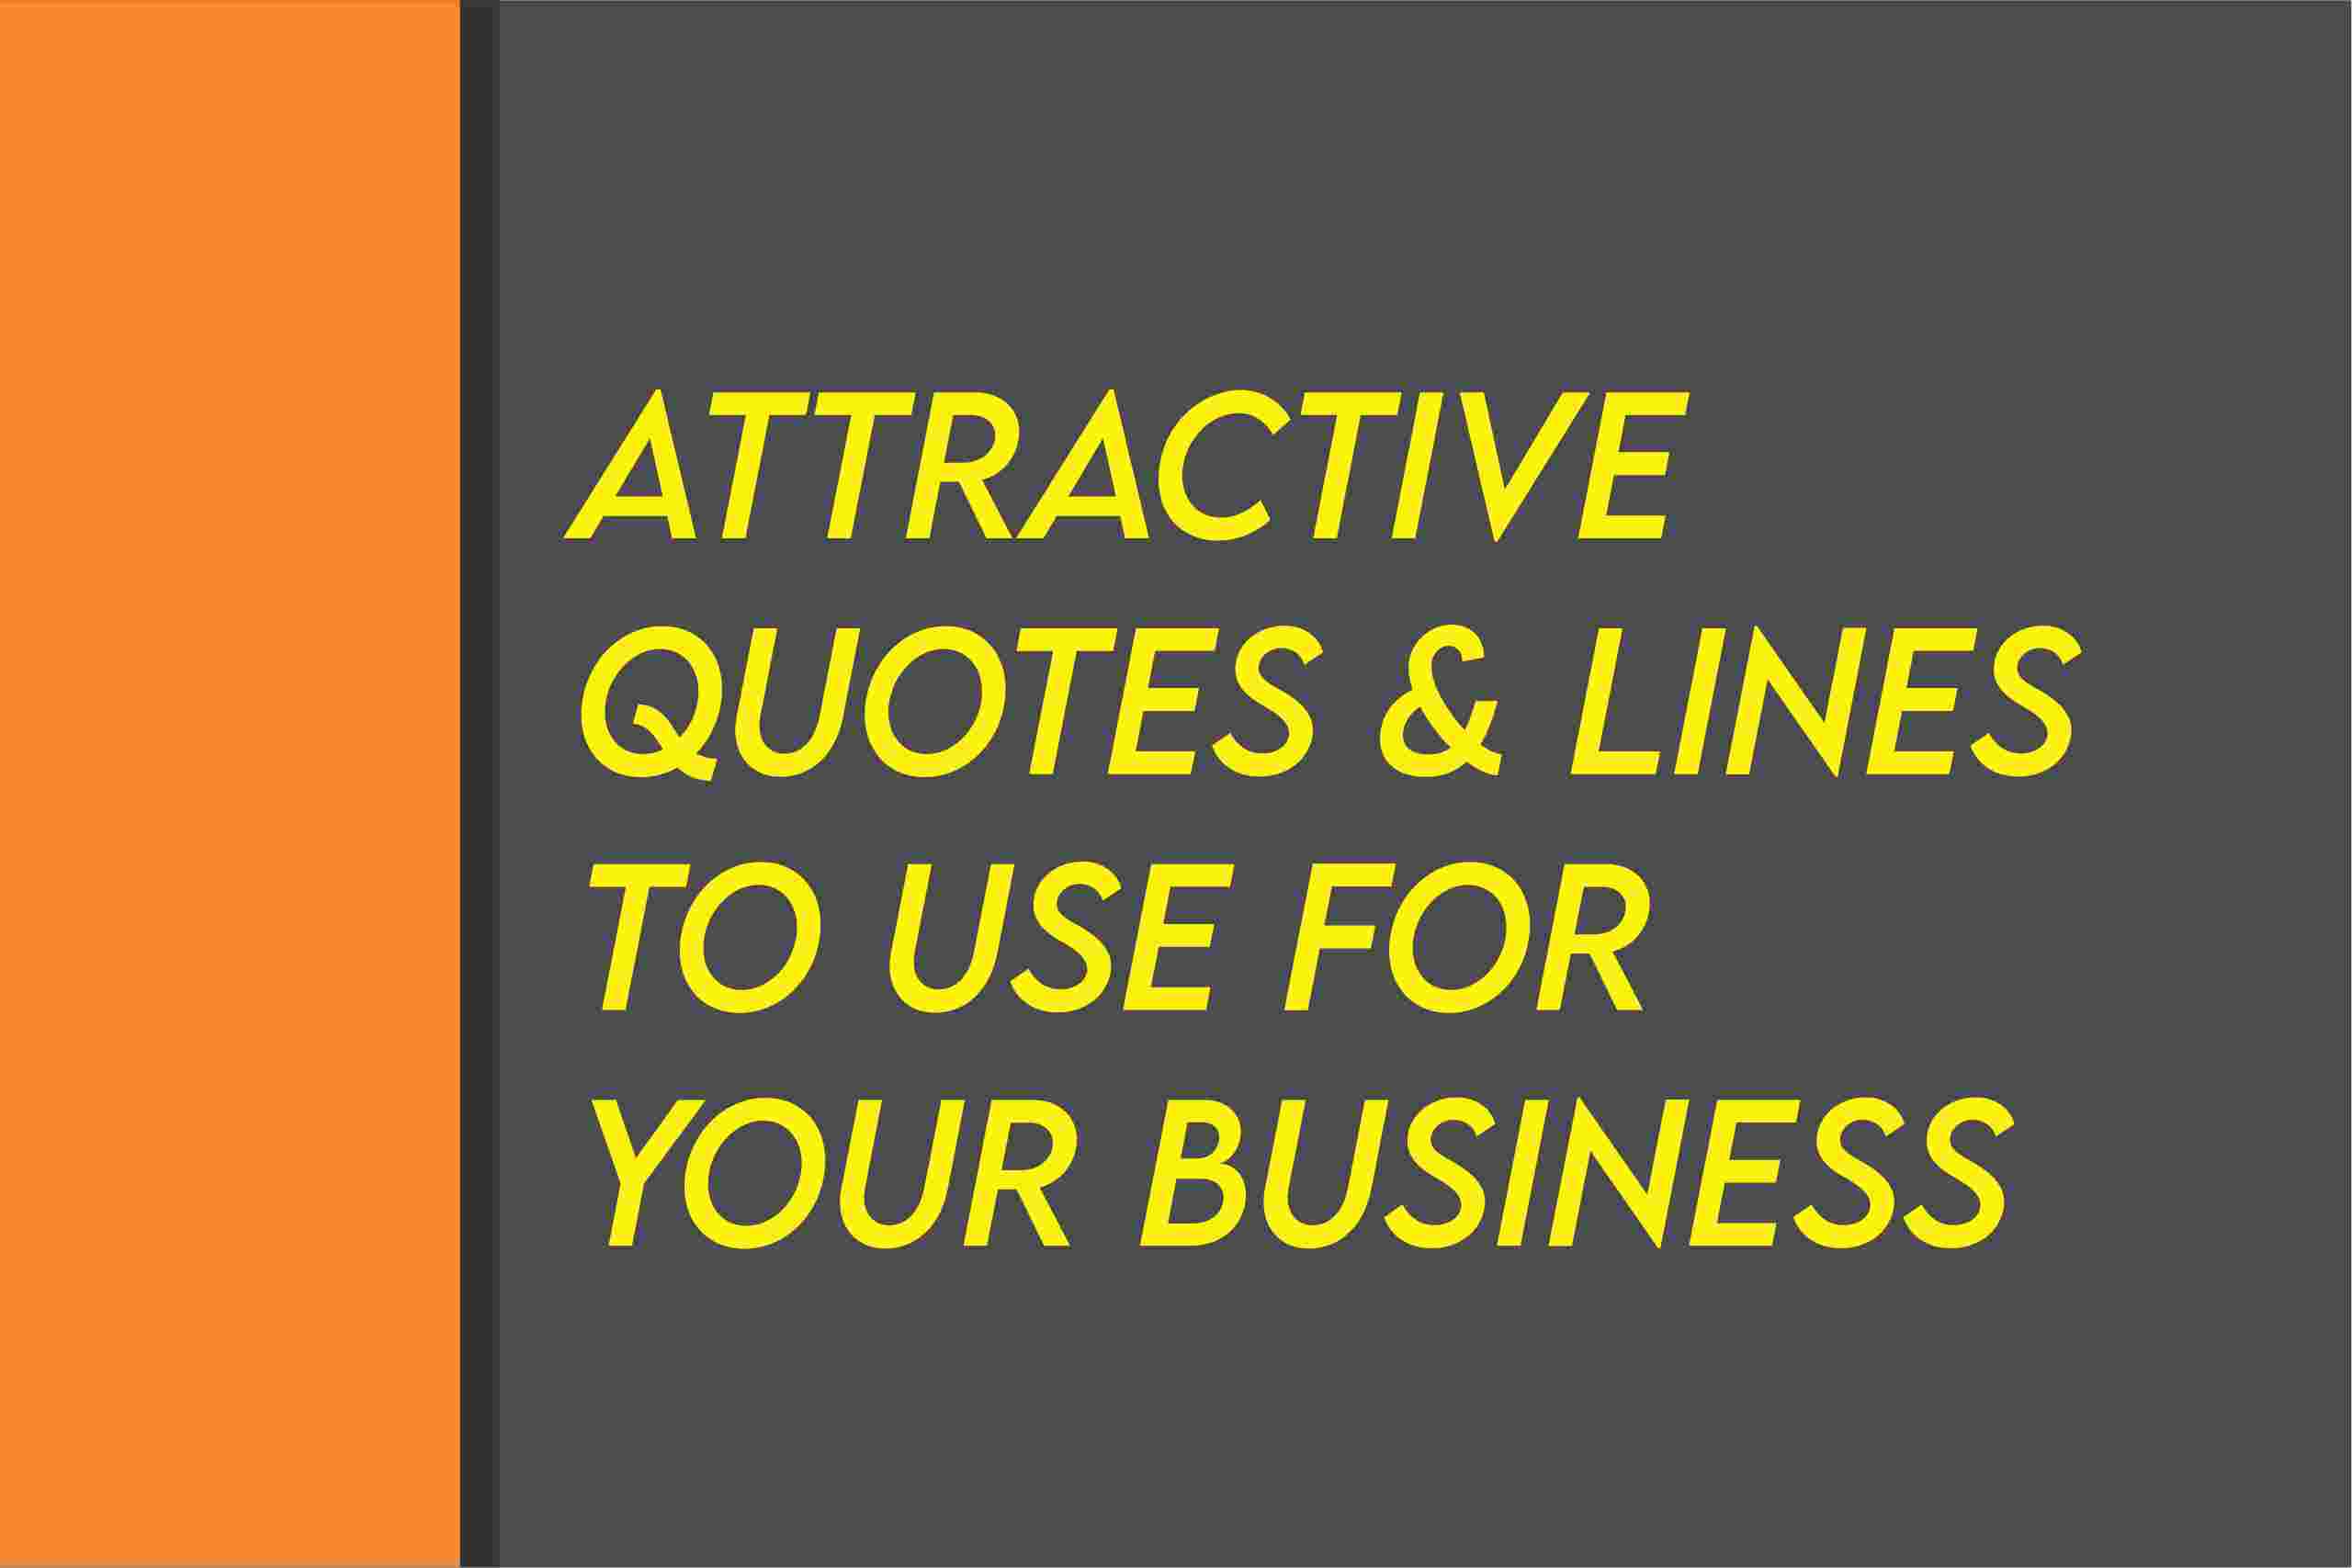 Short Quotes To Attract Customers